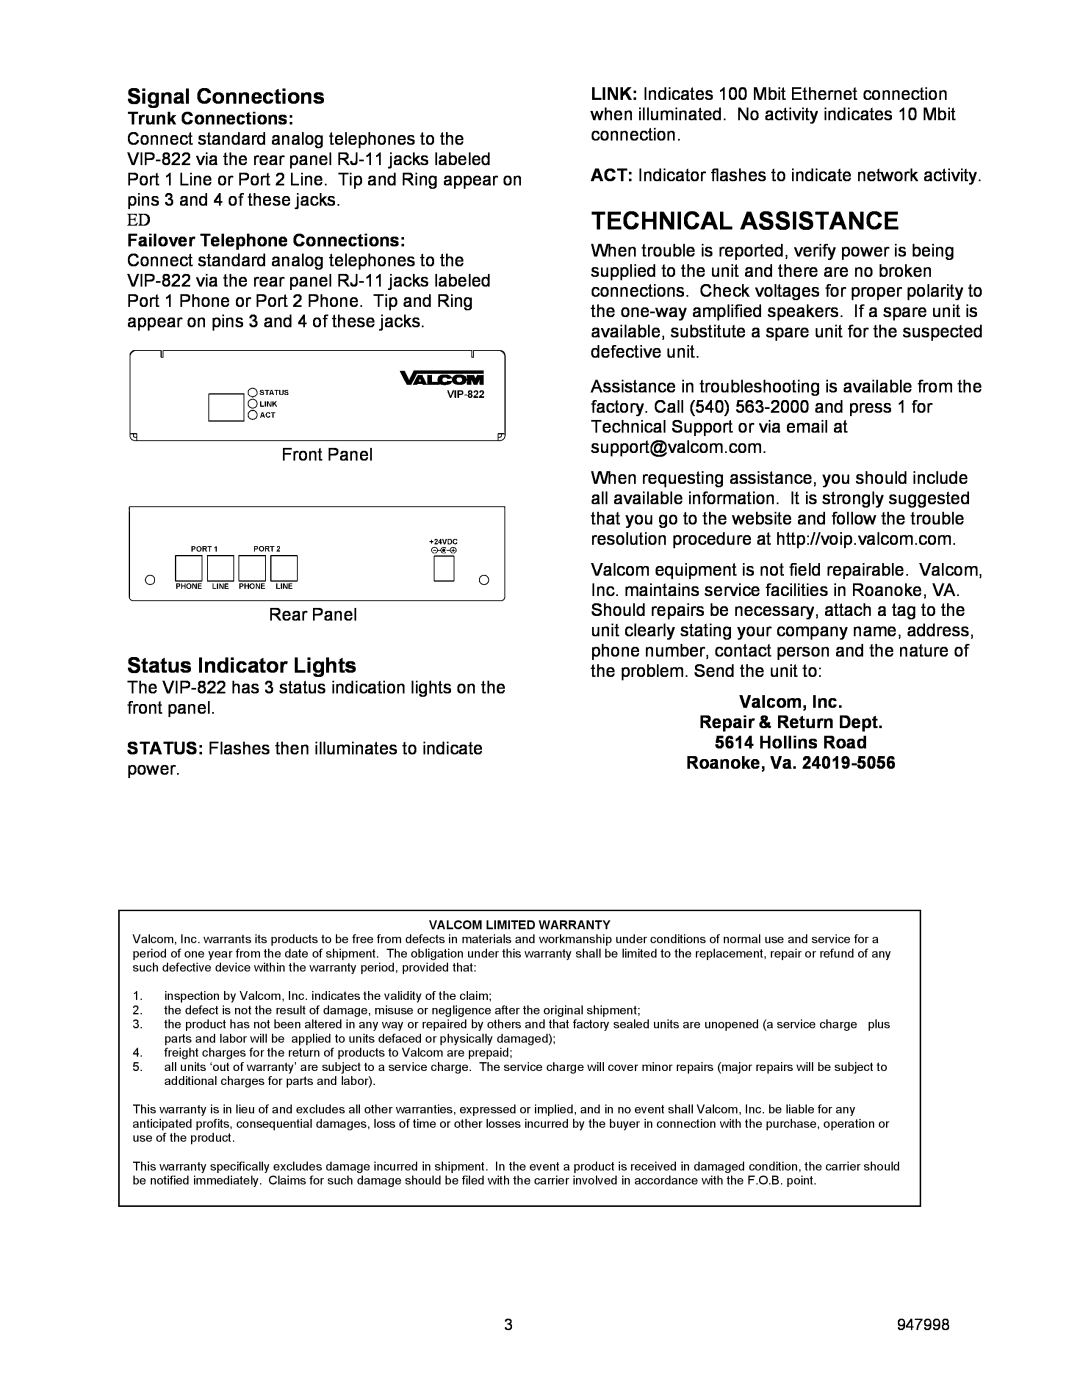 Valcom VIP-822 specifications Technical Assistance, Signal Connections, Status Indicator Lights, Trunk Connections 